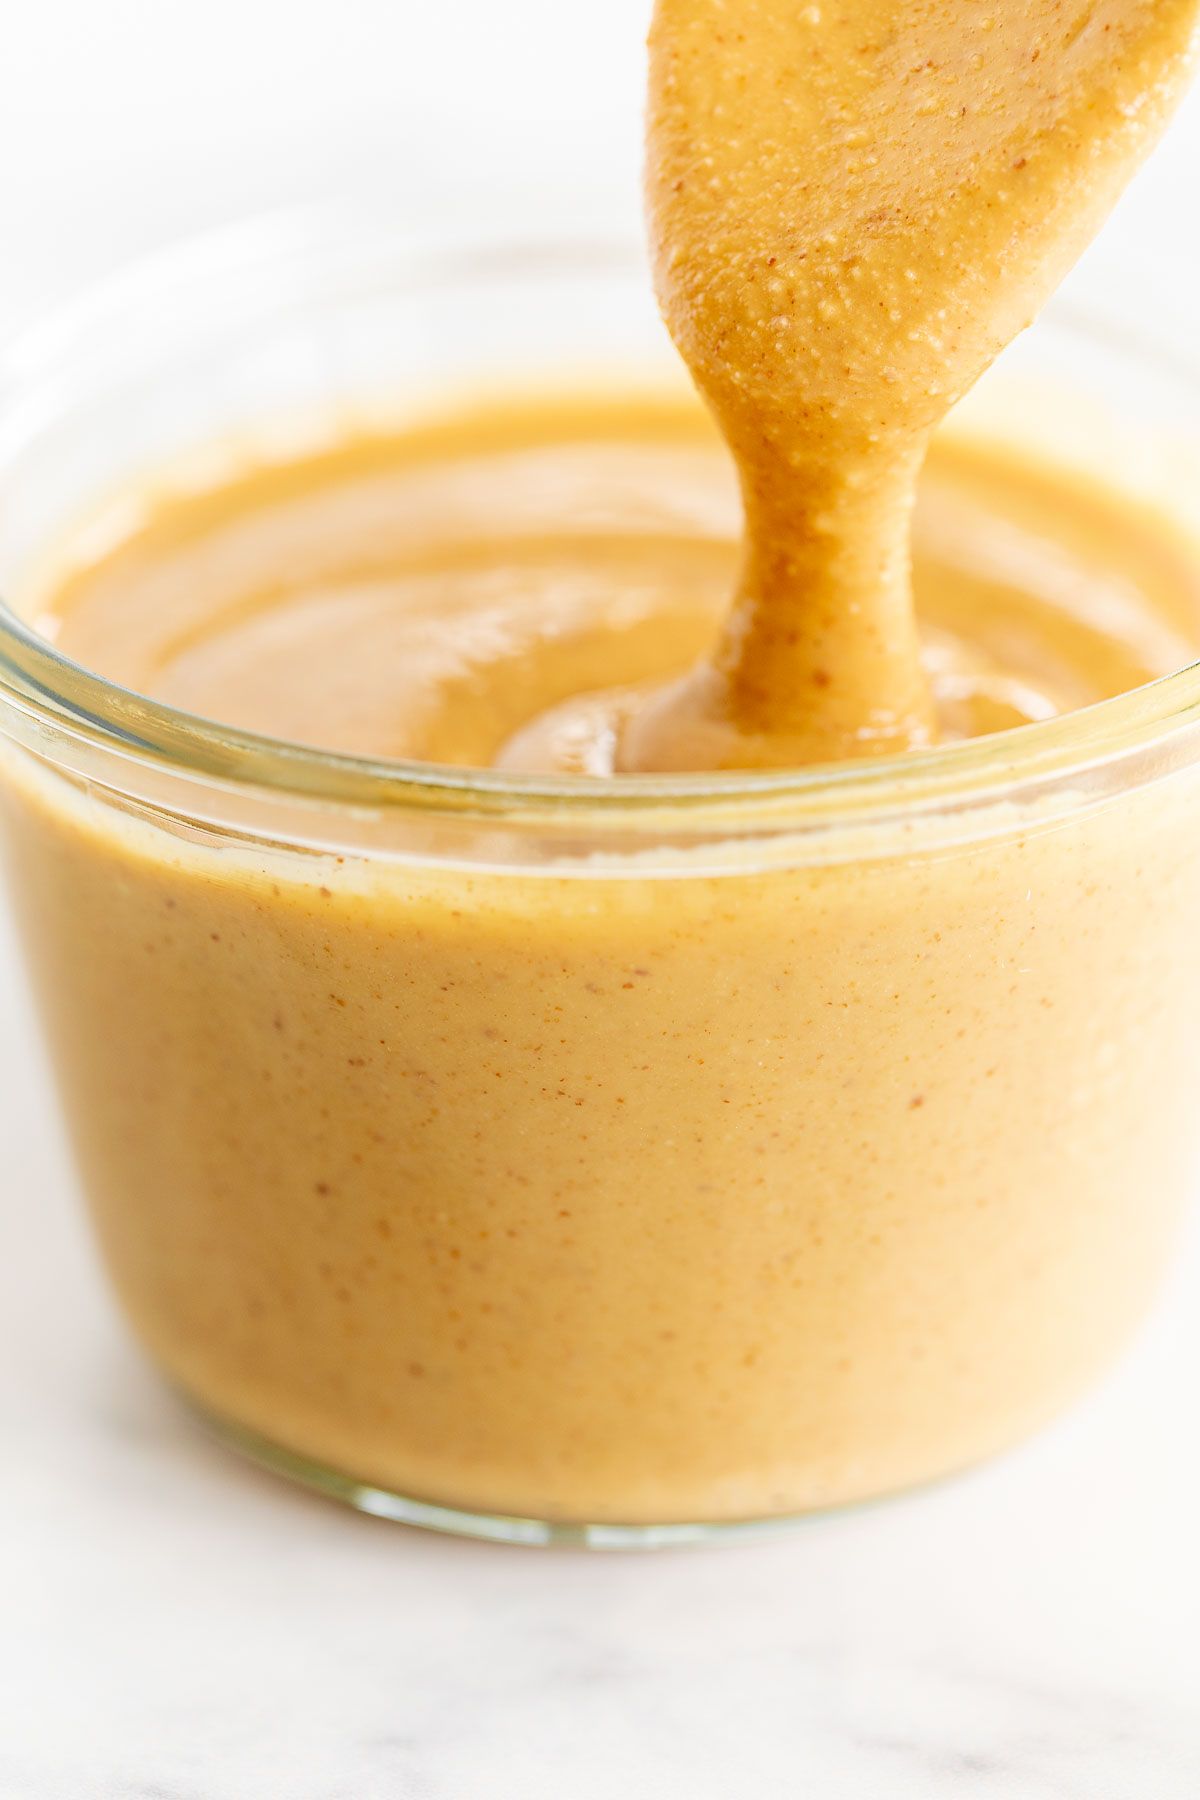 A clear glass jar full of a homemade peanut butter recipe, spoon pulling some out at the top.